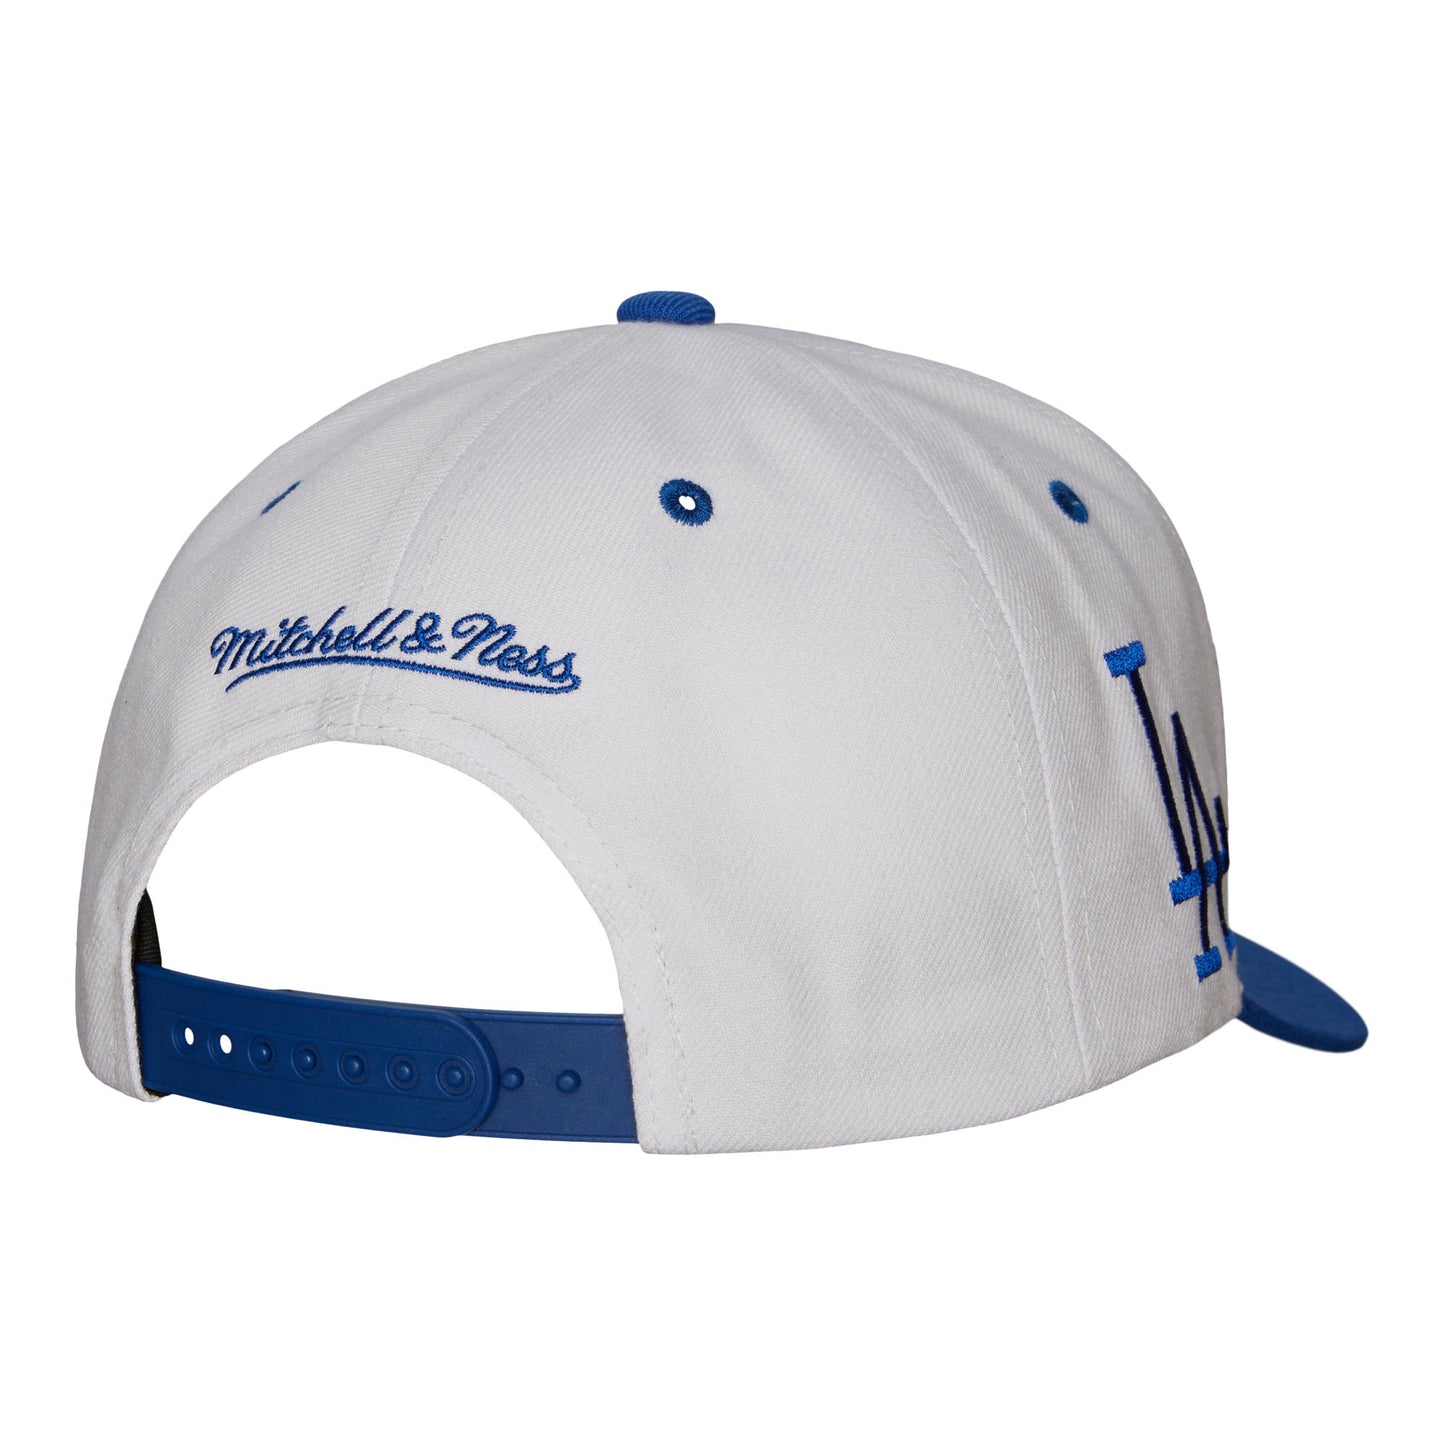 Los Angeles Dodgers  Mitchell & Ness Evergreen Cooperstown Pro Crown Snap Back Hat